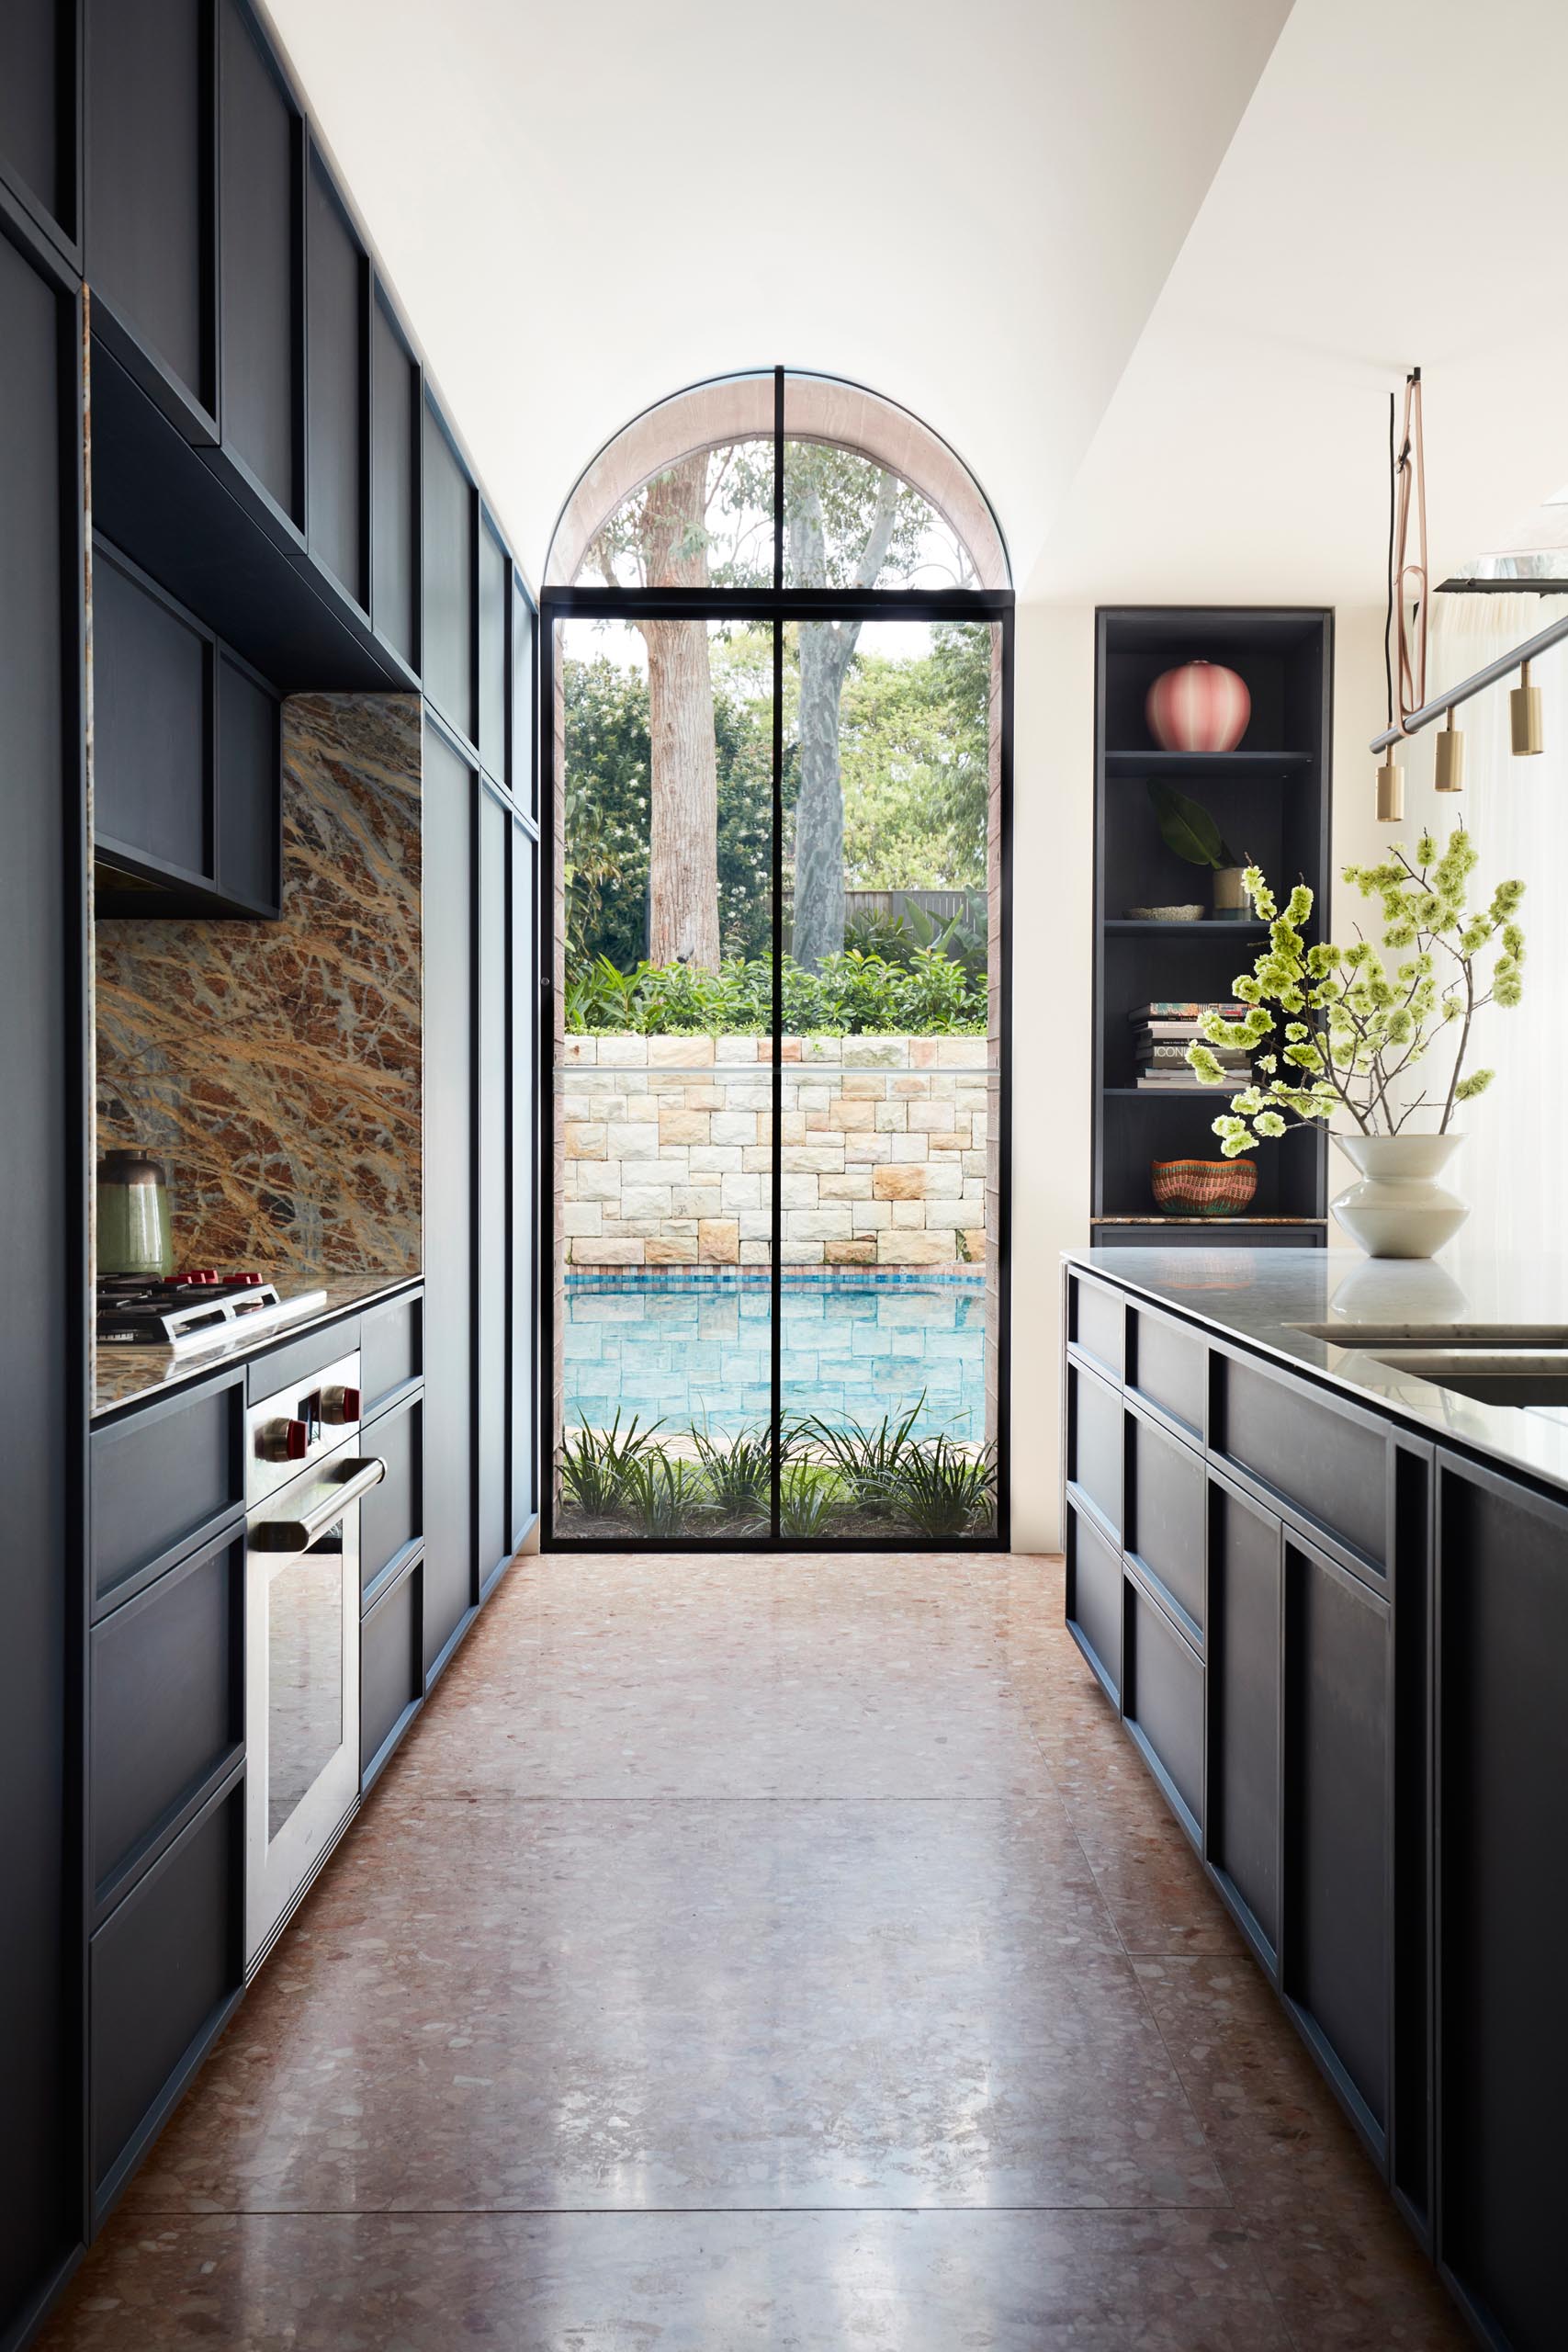 A modern kitchen with dark hardware free cabinets, and a large arched window with views of the swimming pool.